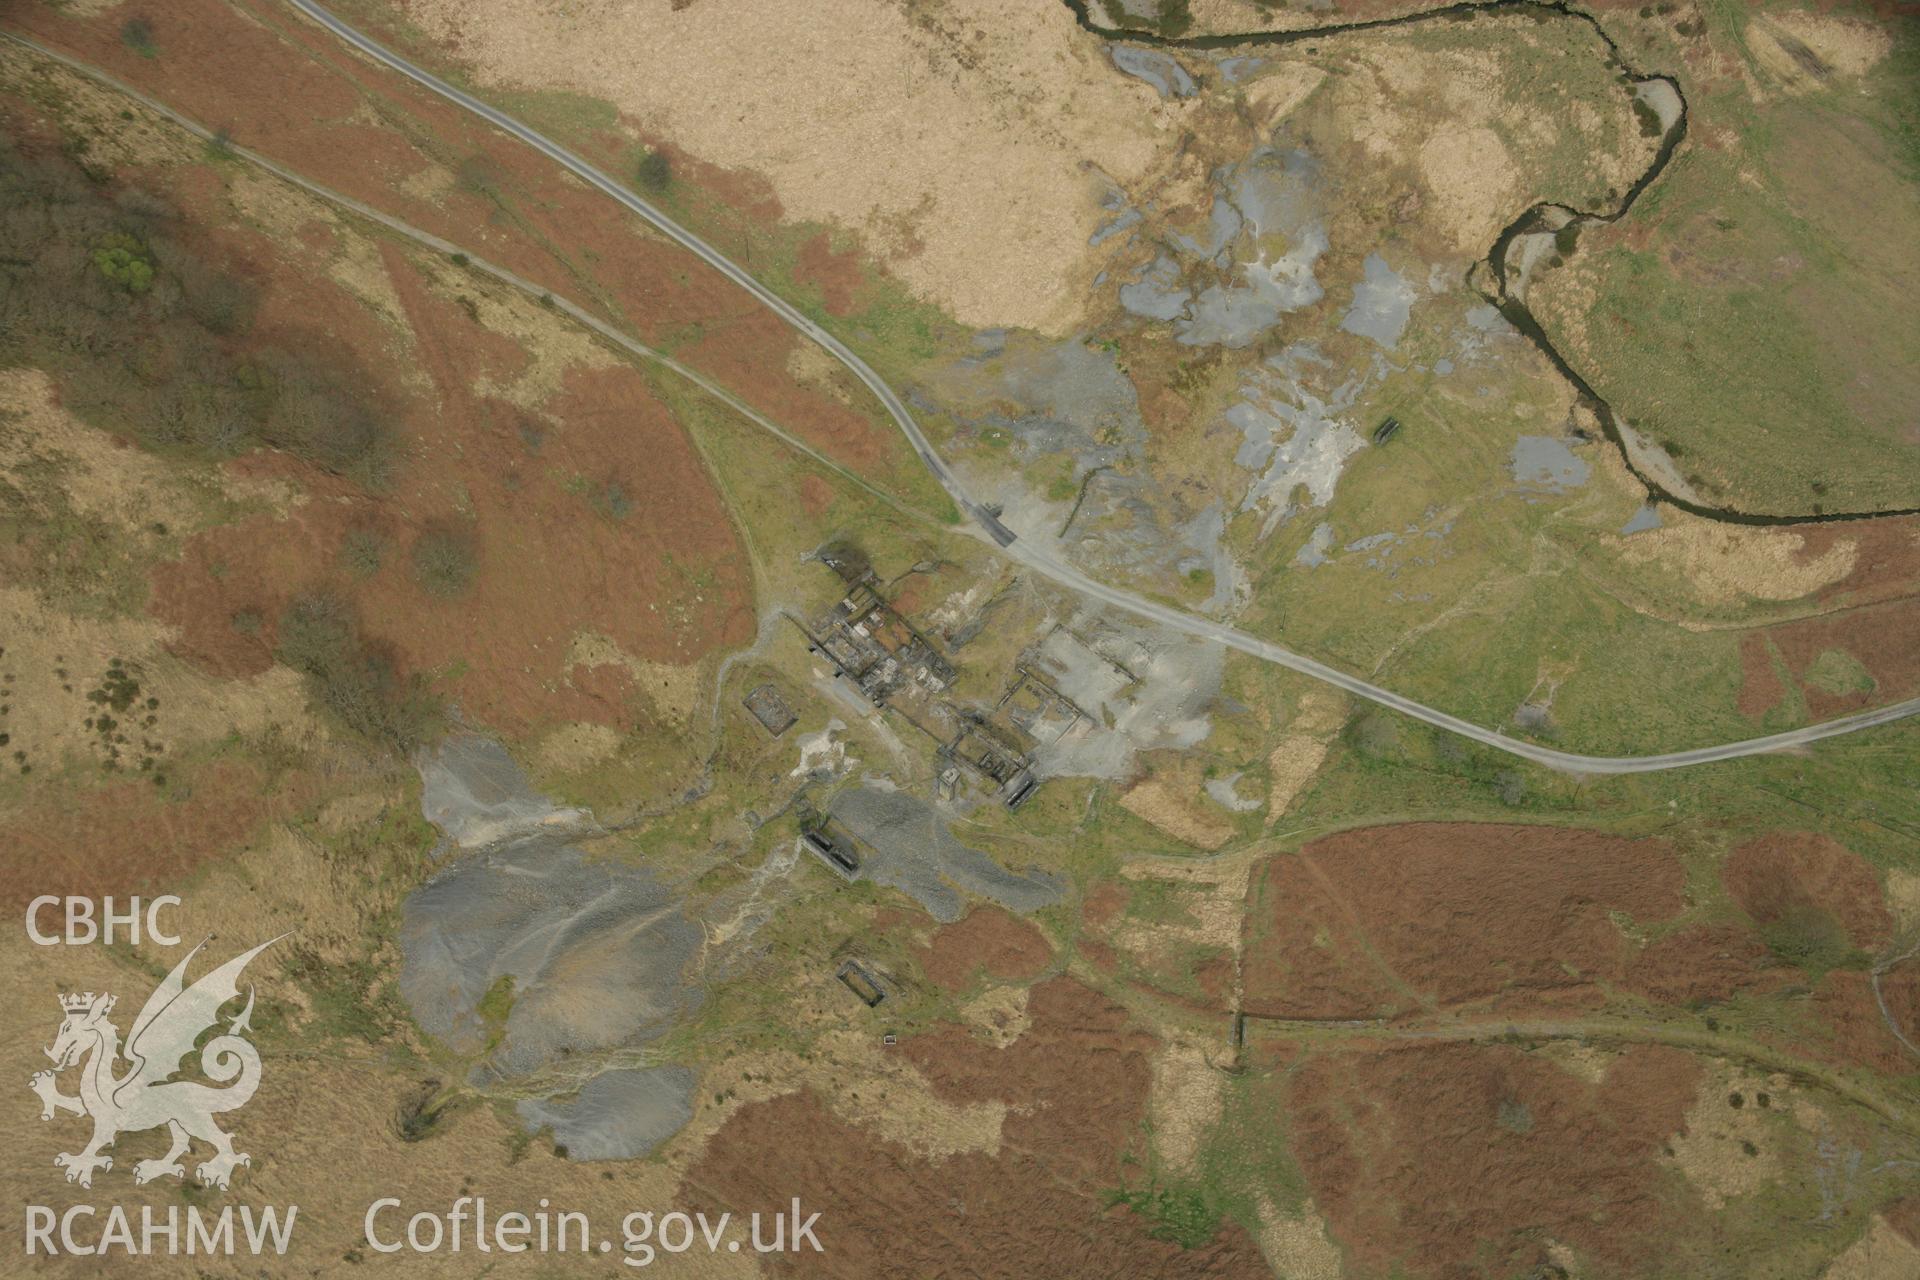 RCAHMW colour oblique aerial photograph of Bwlchglas Mine, East of Talybont. Taken on 17 April 2007 by Toby Driver